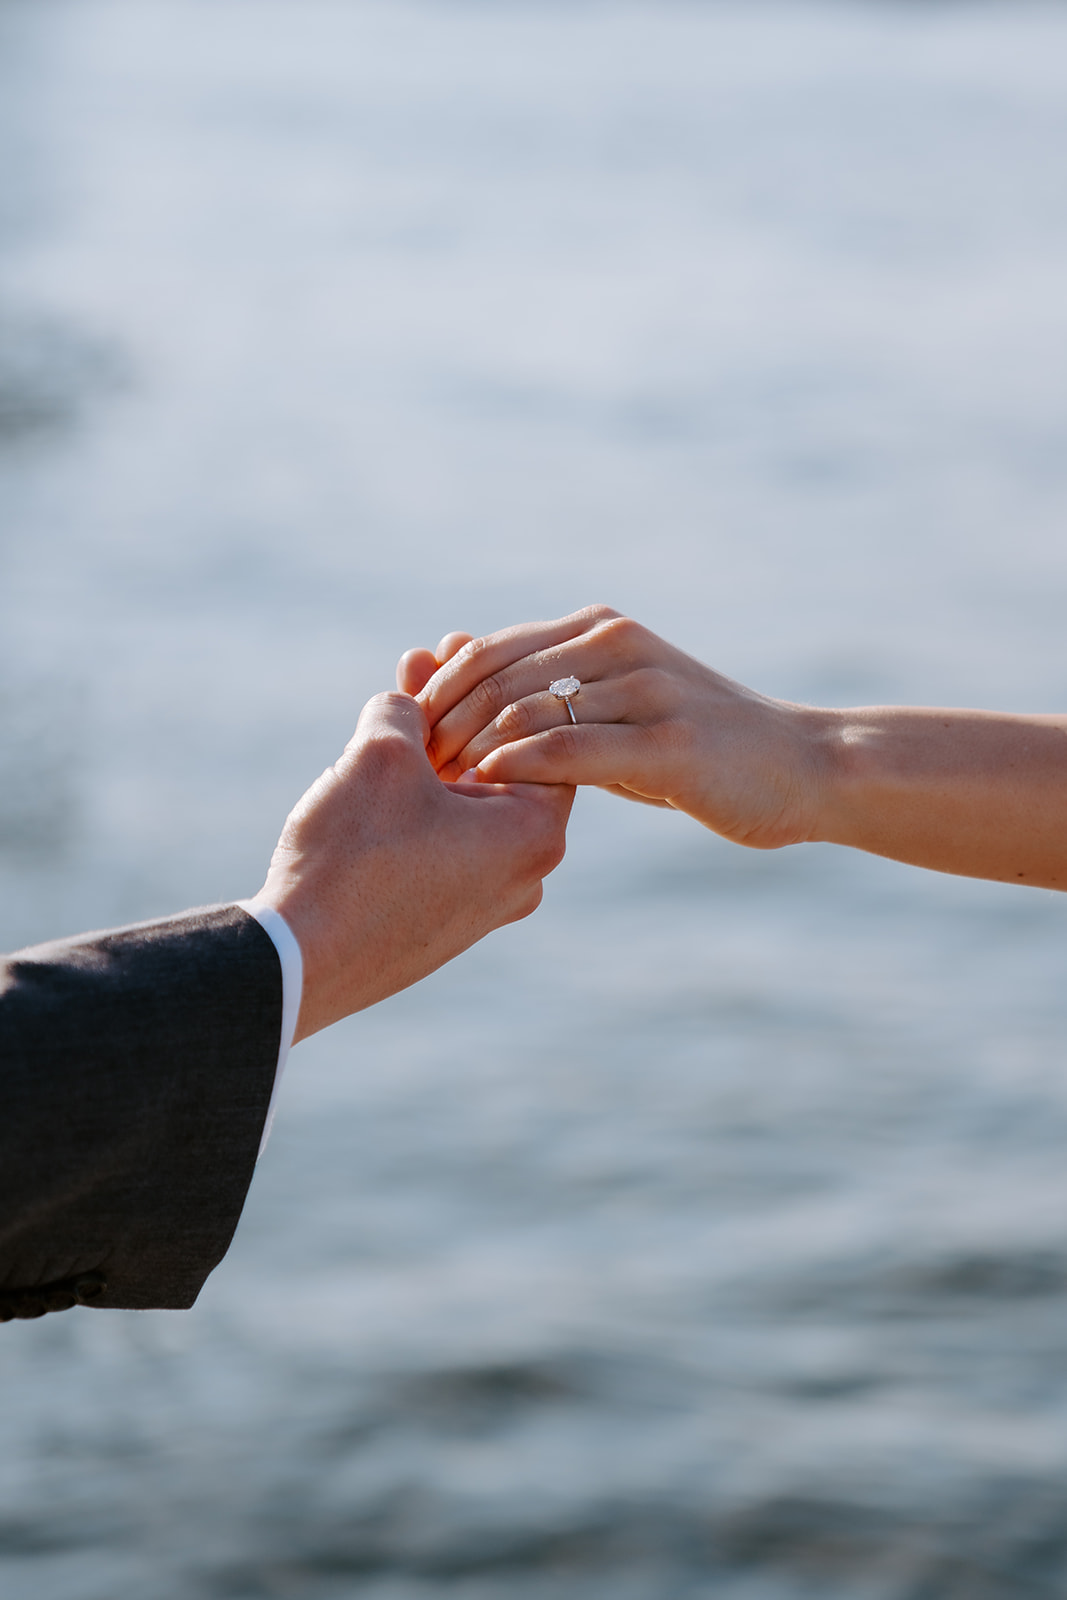 Two people holding hands, one wearing an engagement ring against a water backdrop.